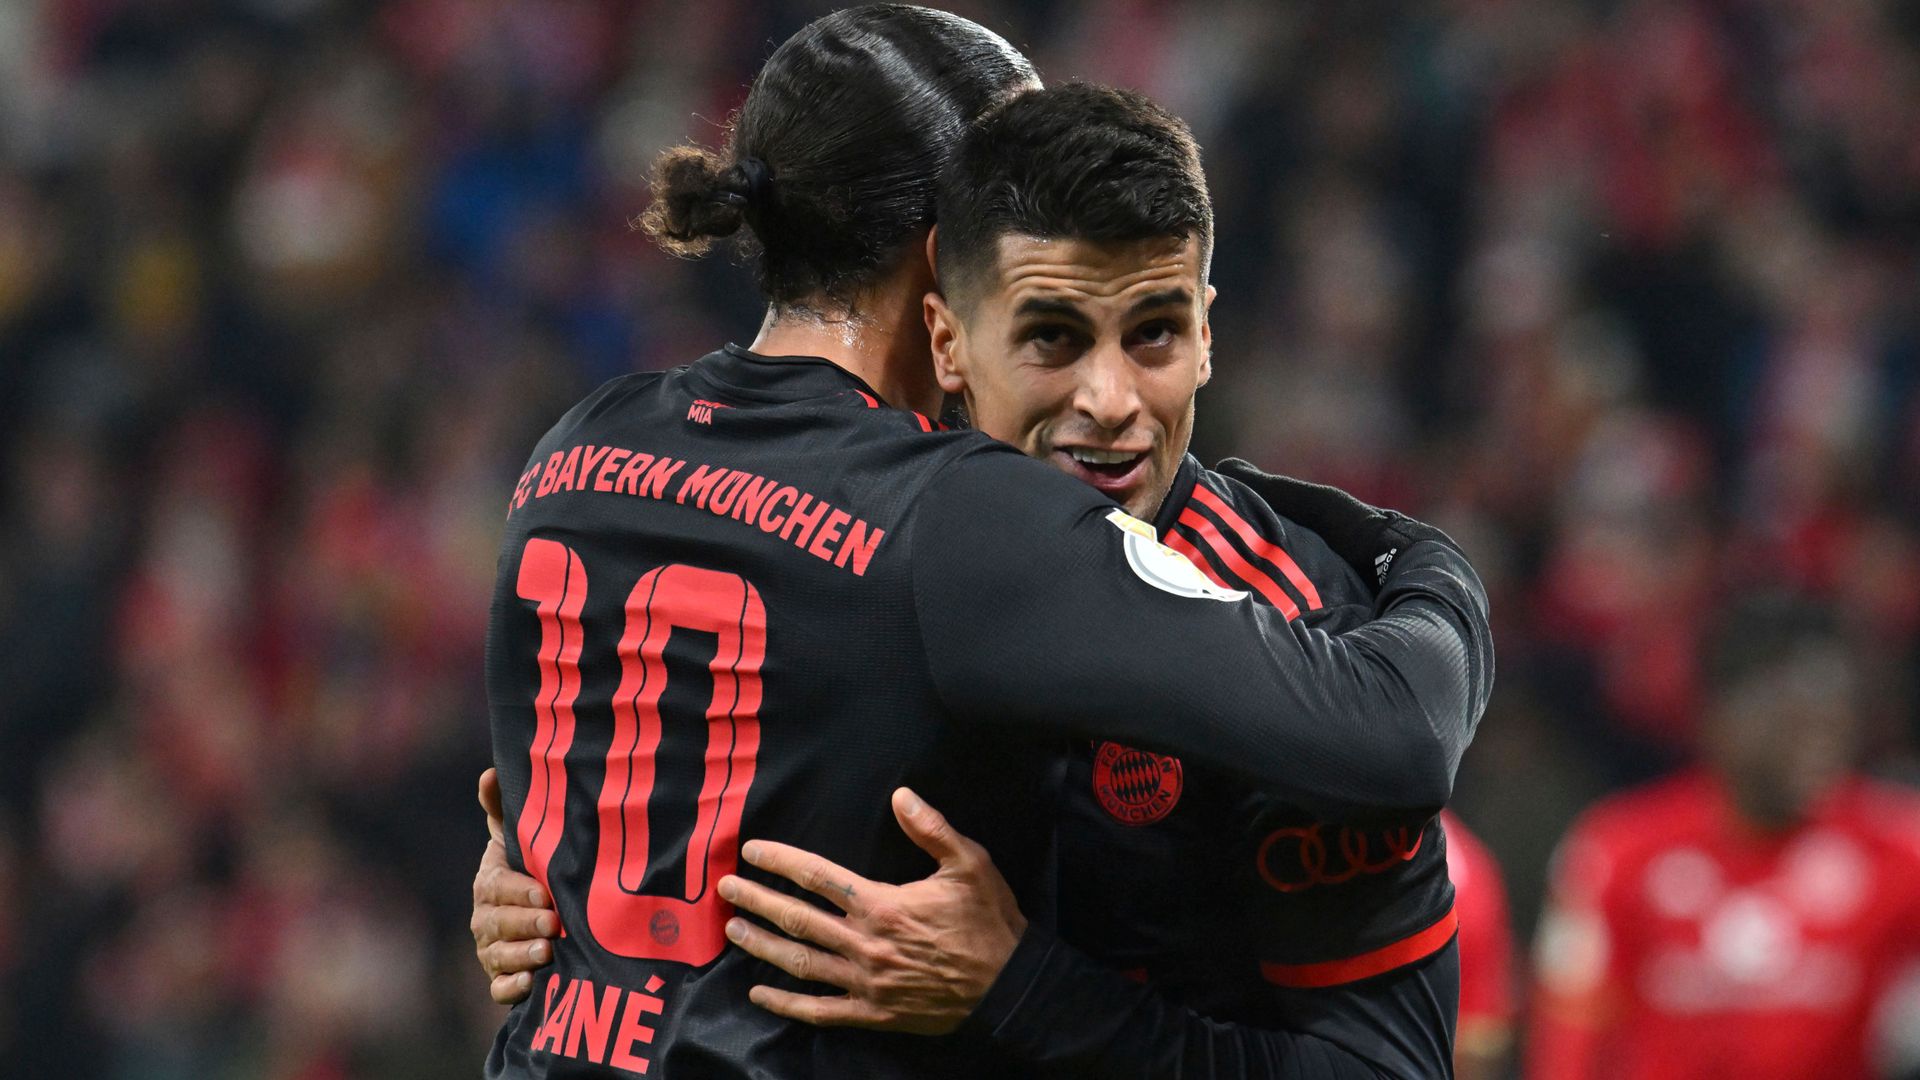 Euro round-up: Cancelo shines on Bayern debut | Mbappe misses two pens